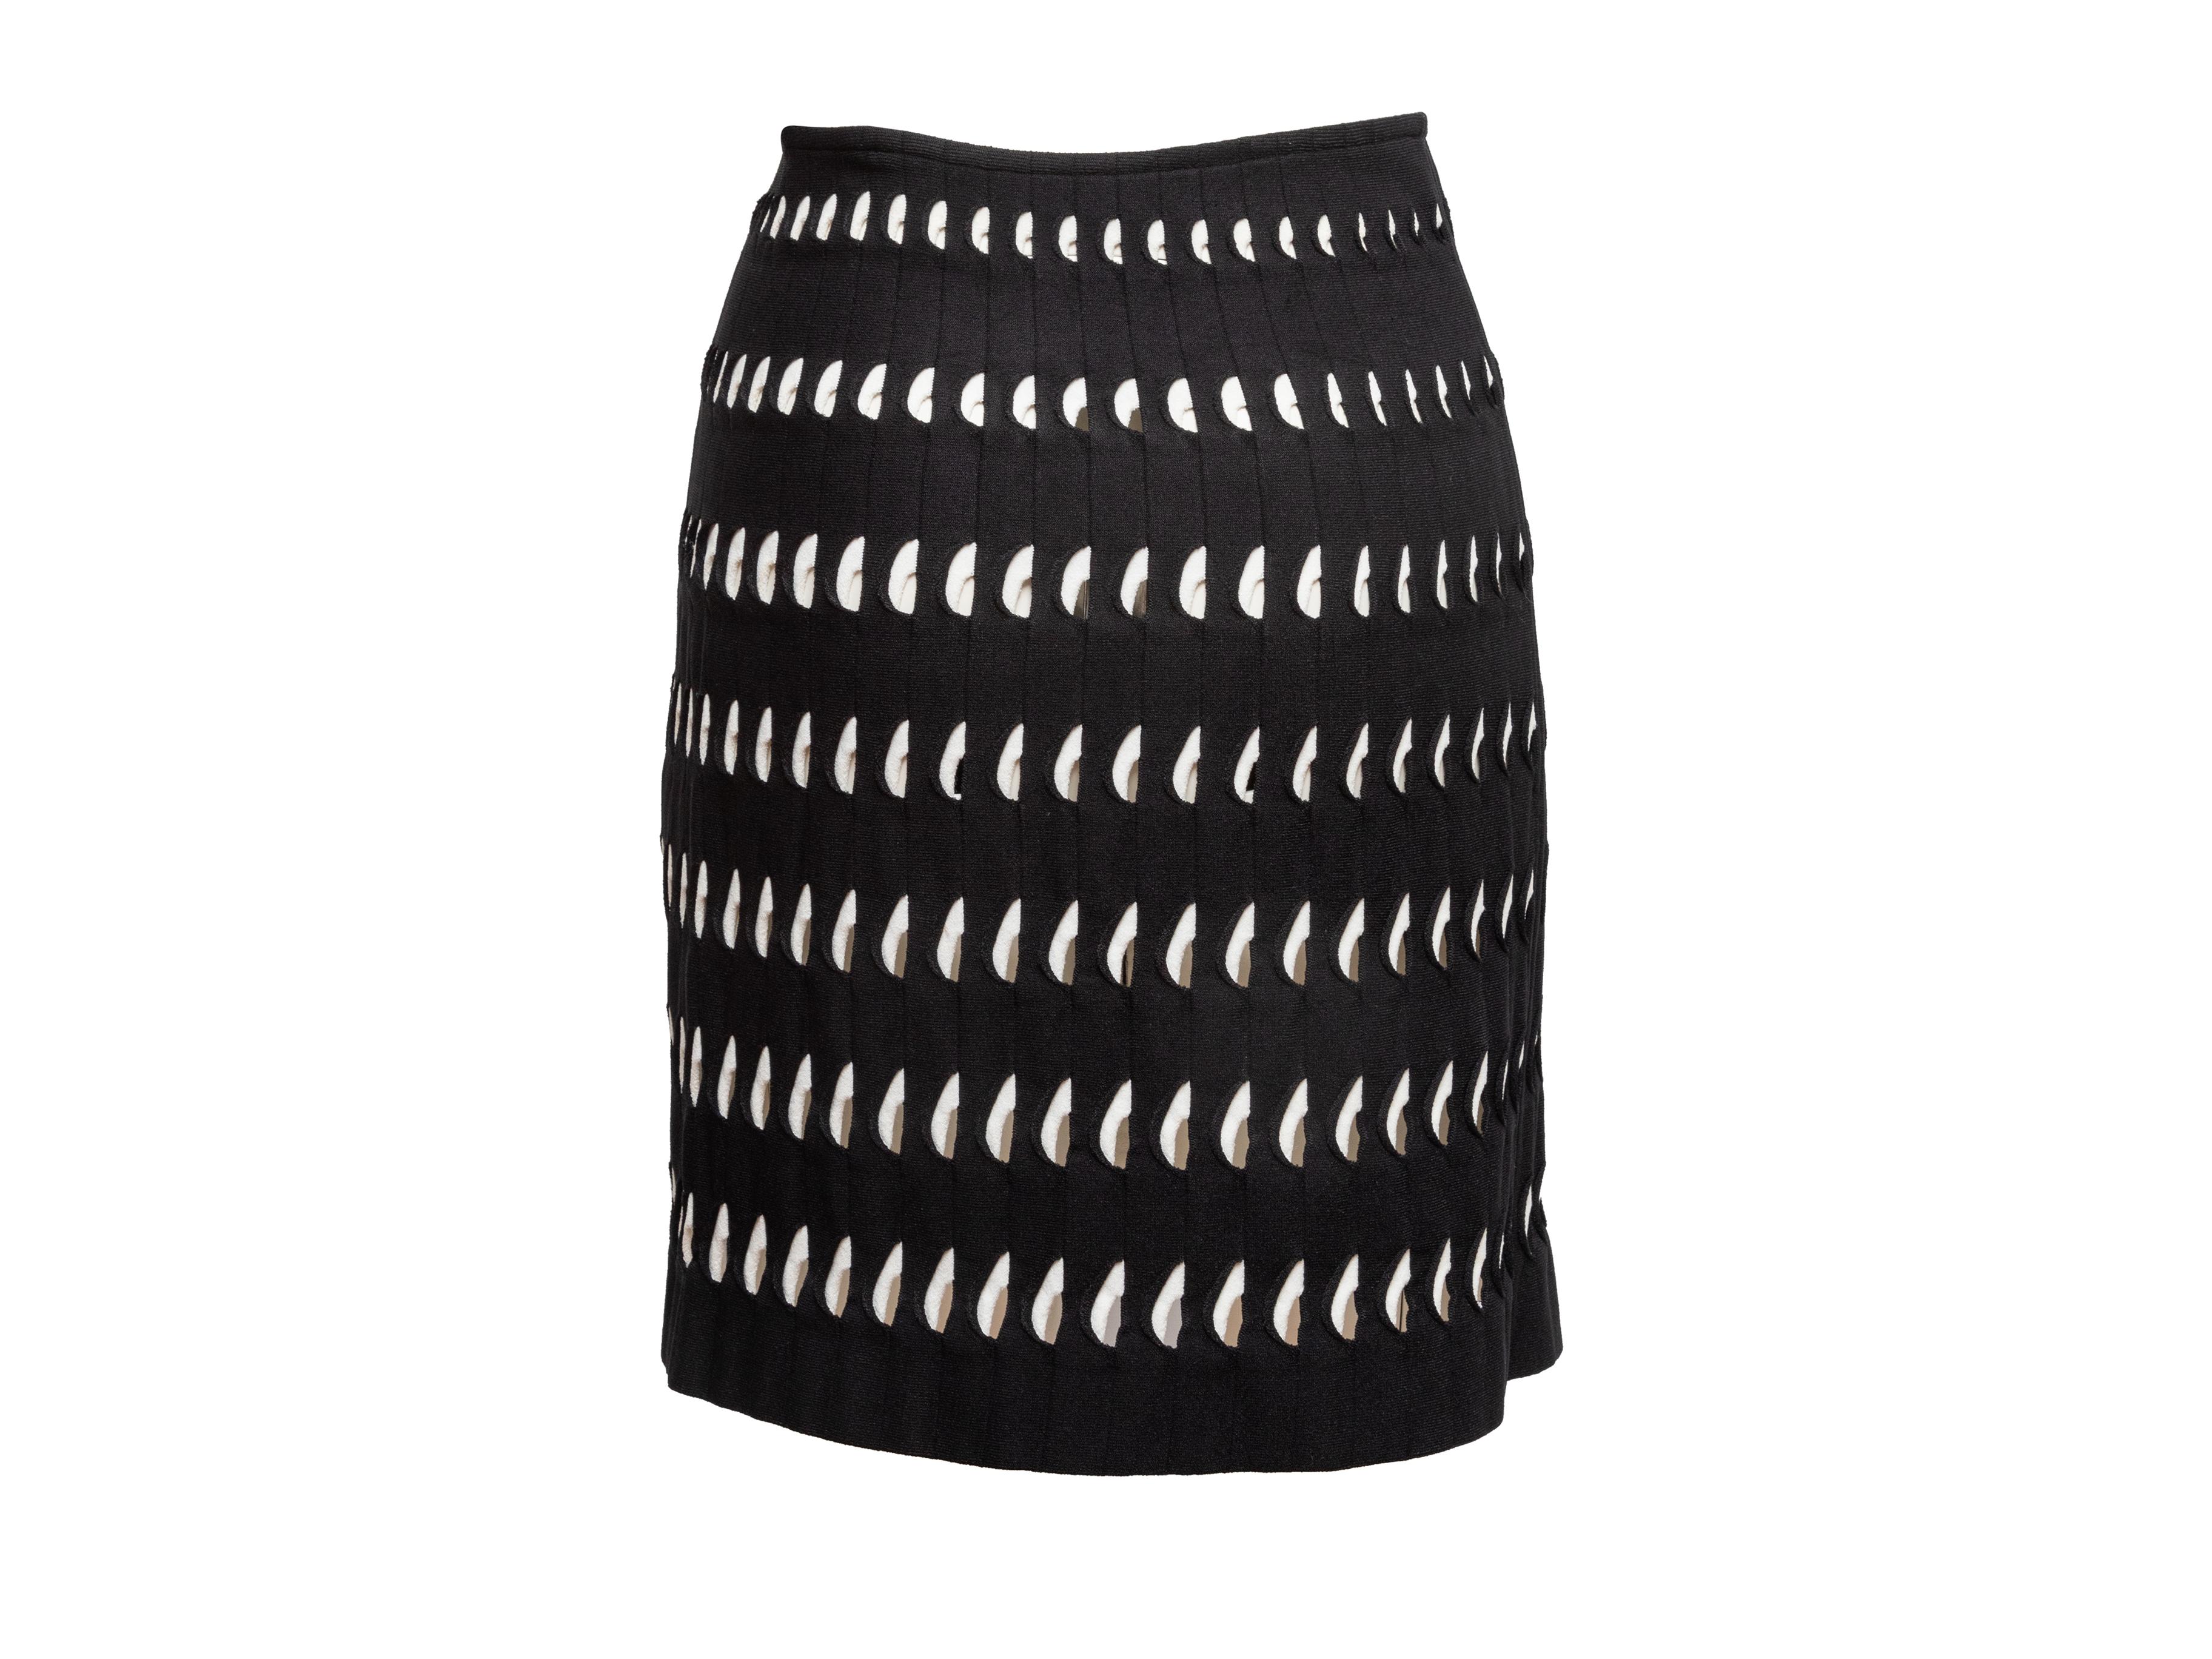 Alaia Black & White Cutout Pleated Skirt In Good Condition For Sale In New York, NY